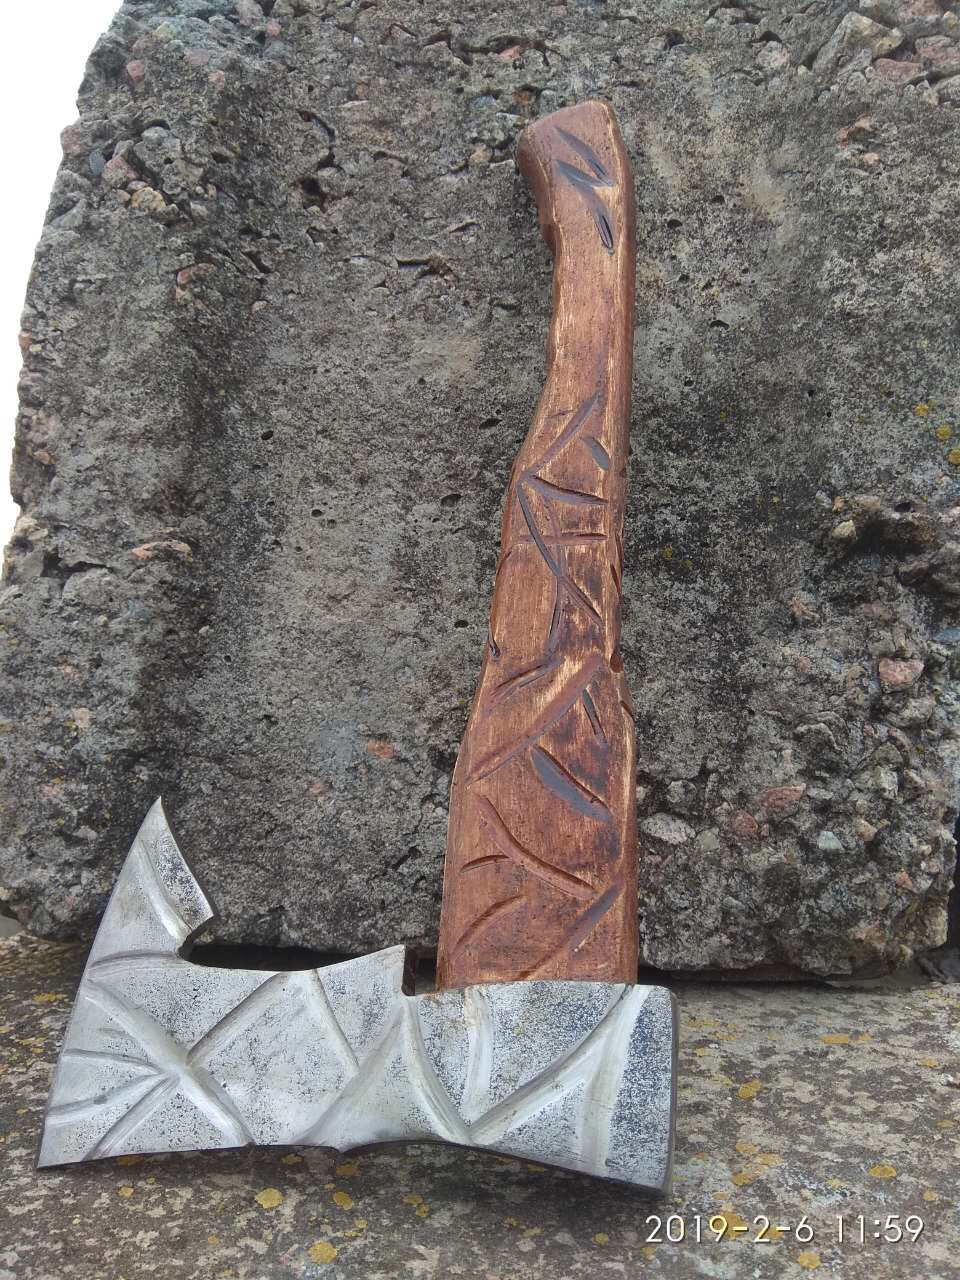 Mens birthday gift, mens axe, axe gift, valentines day, valentines gift, viking axe, hatchet, mens gifts, Fathers Day gift, Daddy gifts, axe